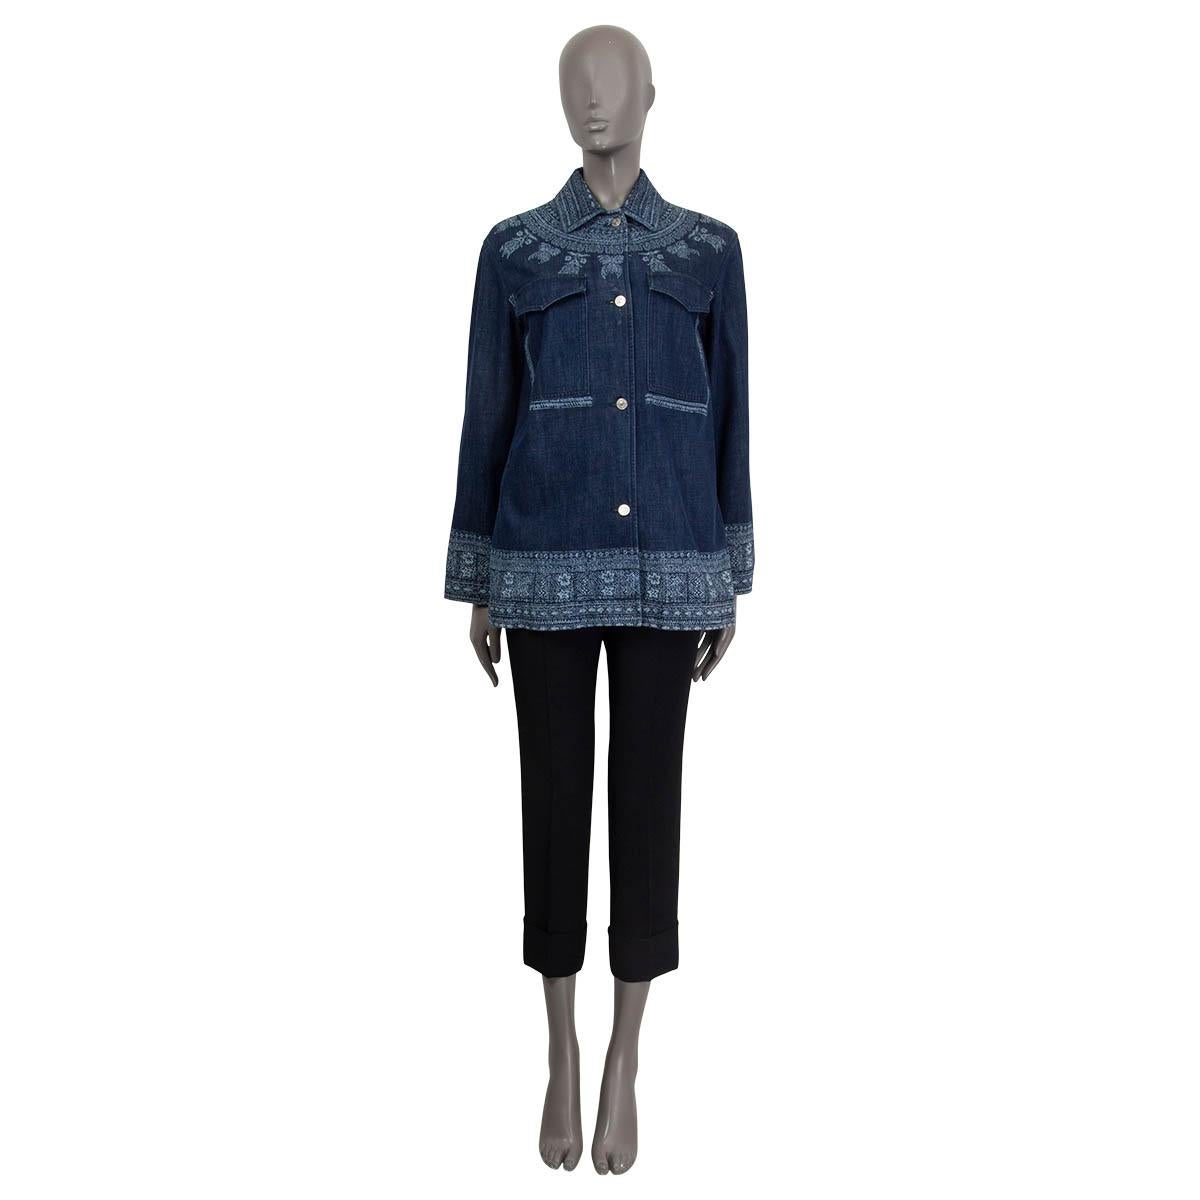 100% authentic Christian Dior Fall/Winter 2018 long denim jacket in dark and light blue cotton (100%). Features a floral-print in light blue, two flap pockets on the front and two slit pockets on the sides. Has the black 'CD' sign embroidered on the